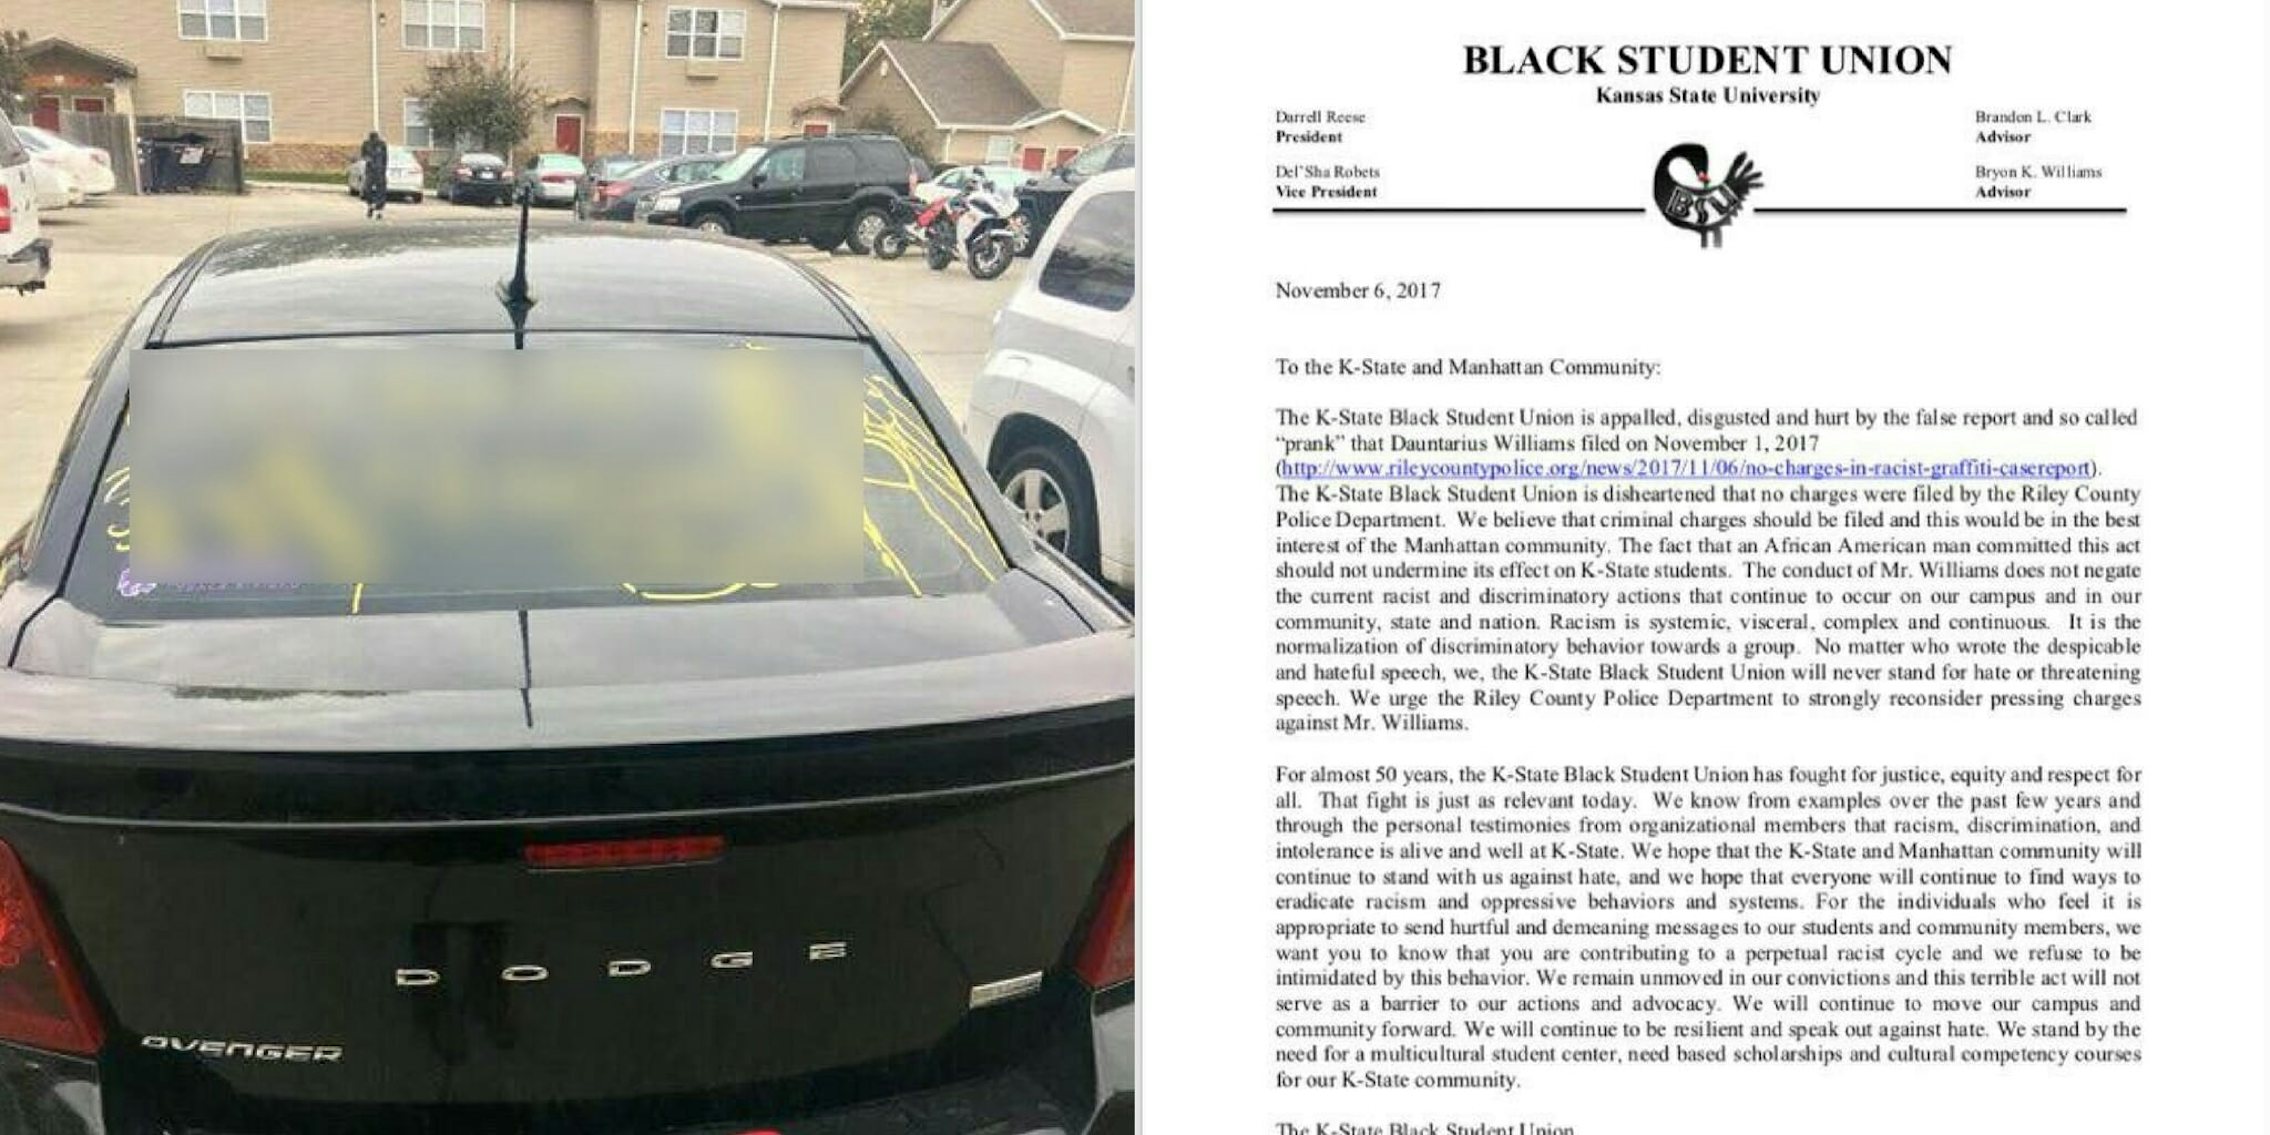 Fake racist graffiti tagged on a car next to a letter from the Kansas State Black Student Union